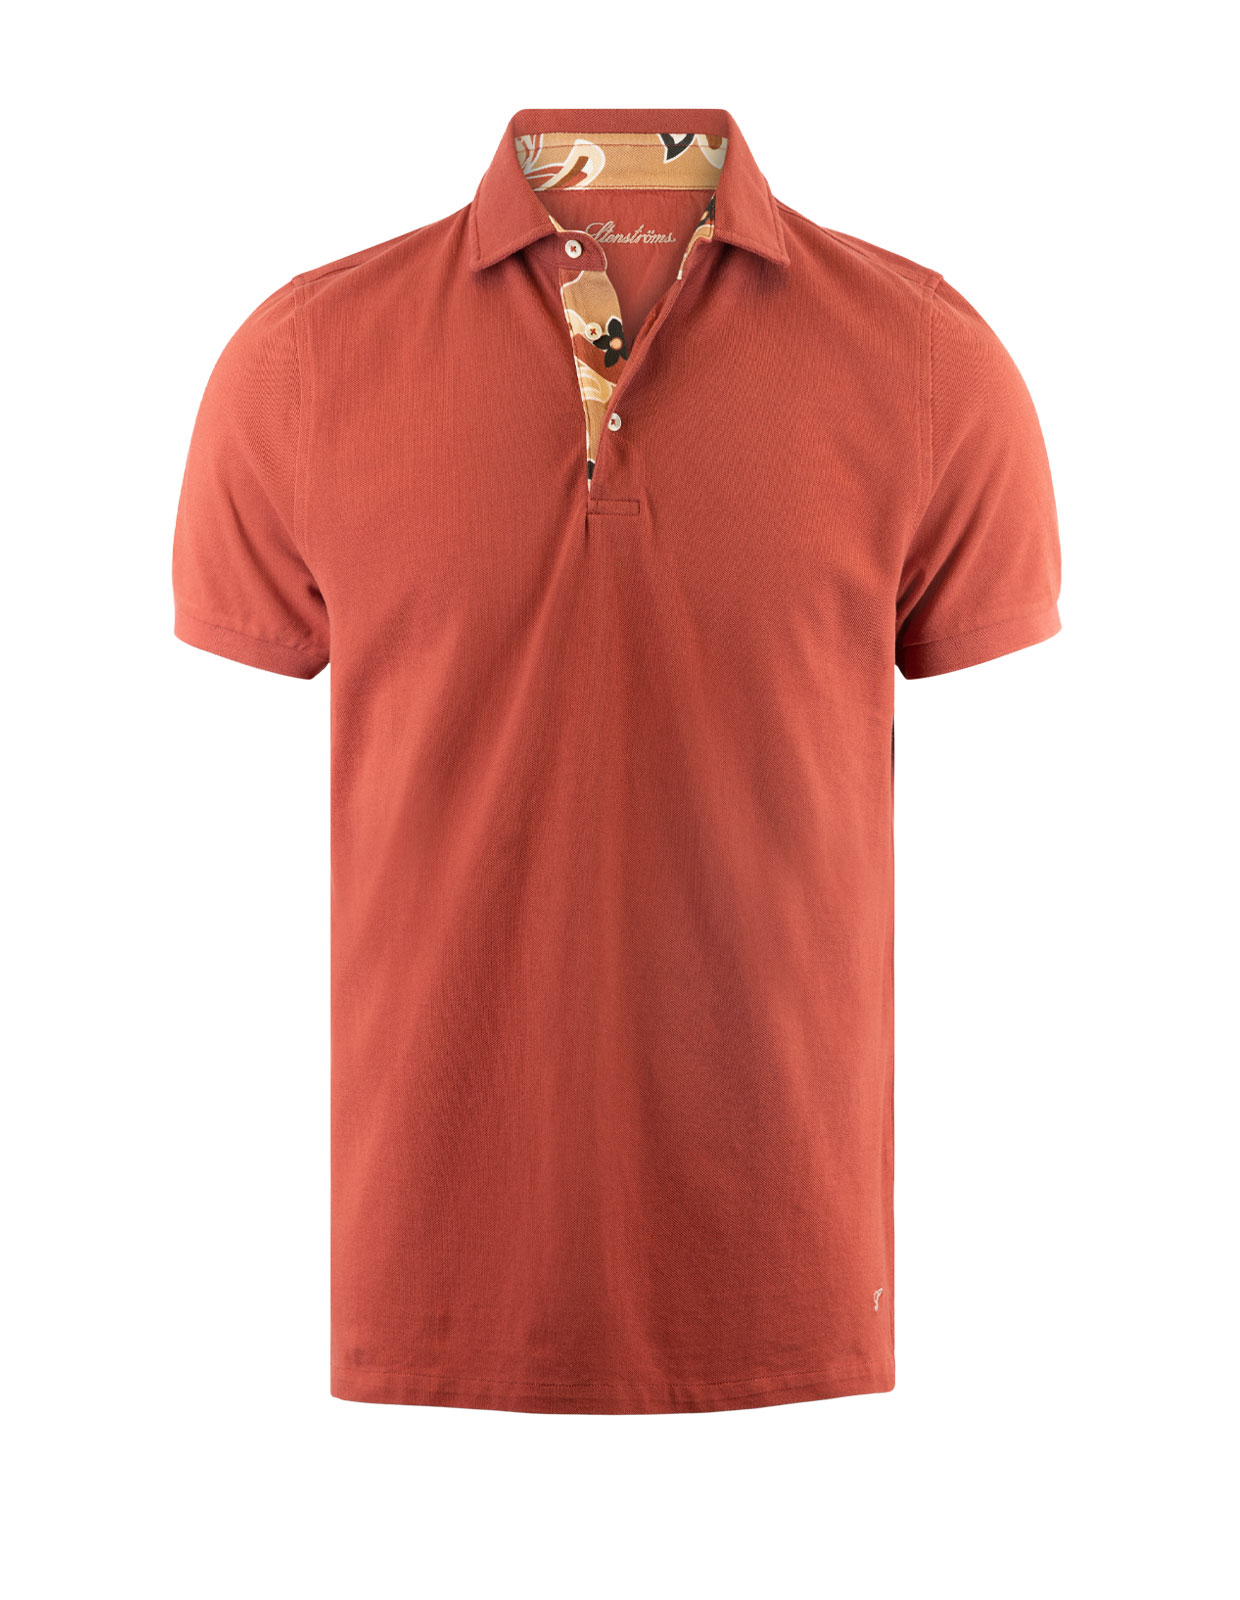 Contrast Piquet Polo Red